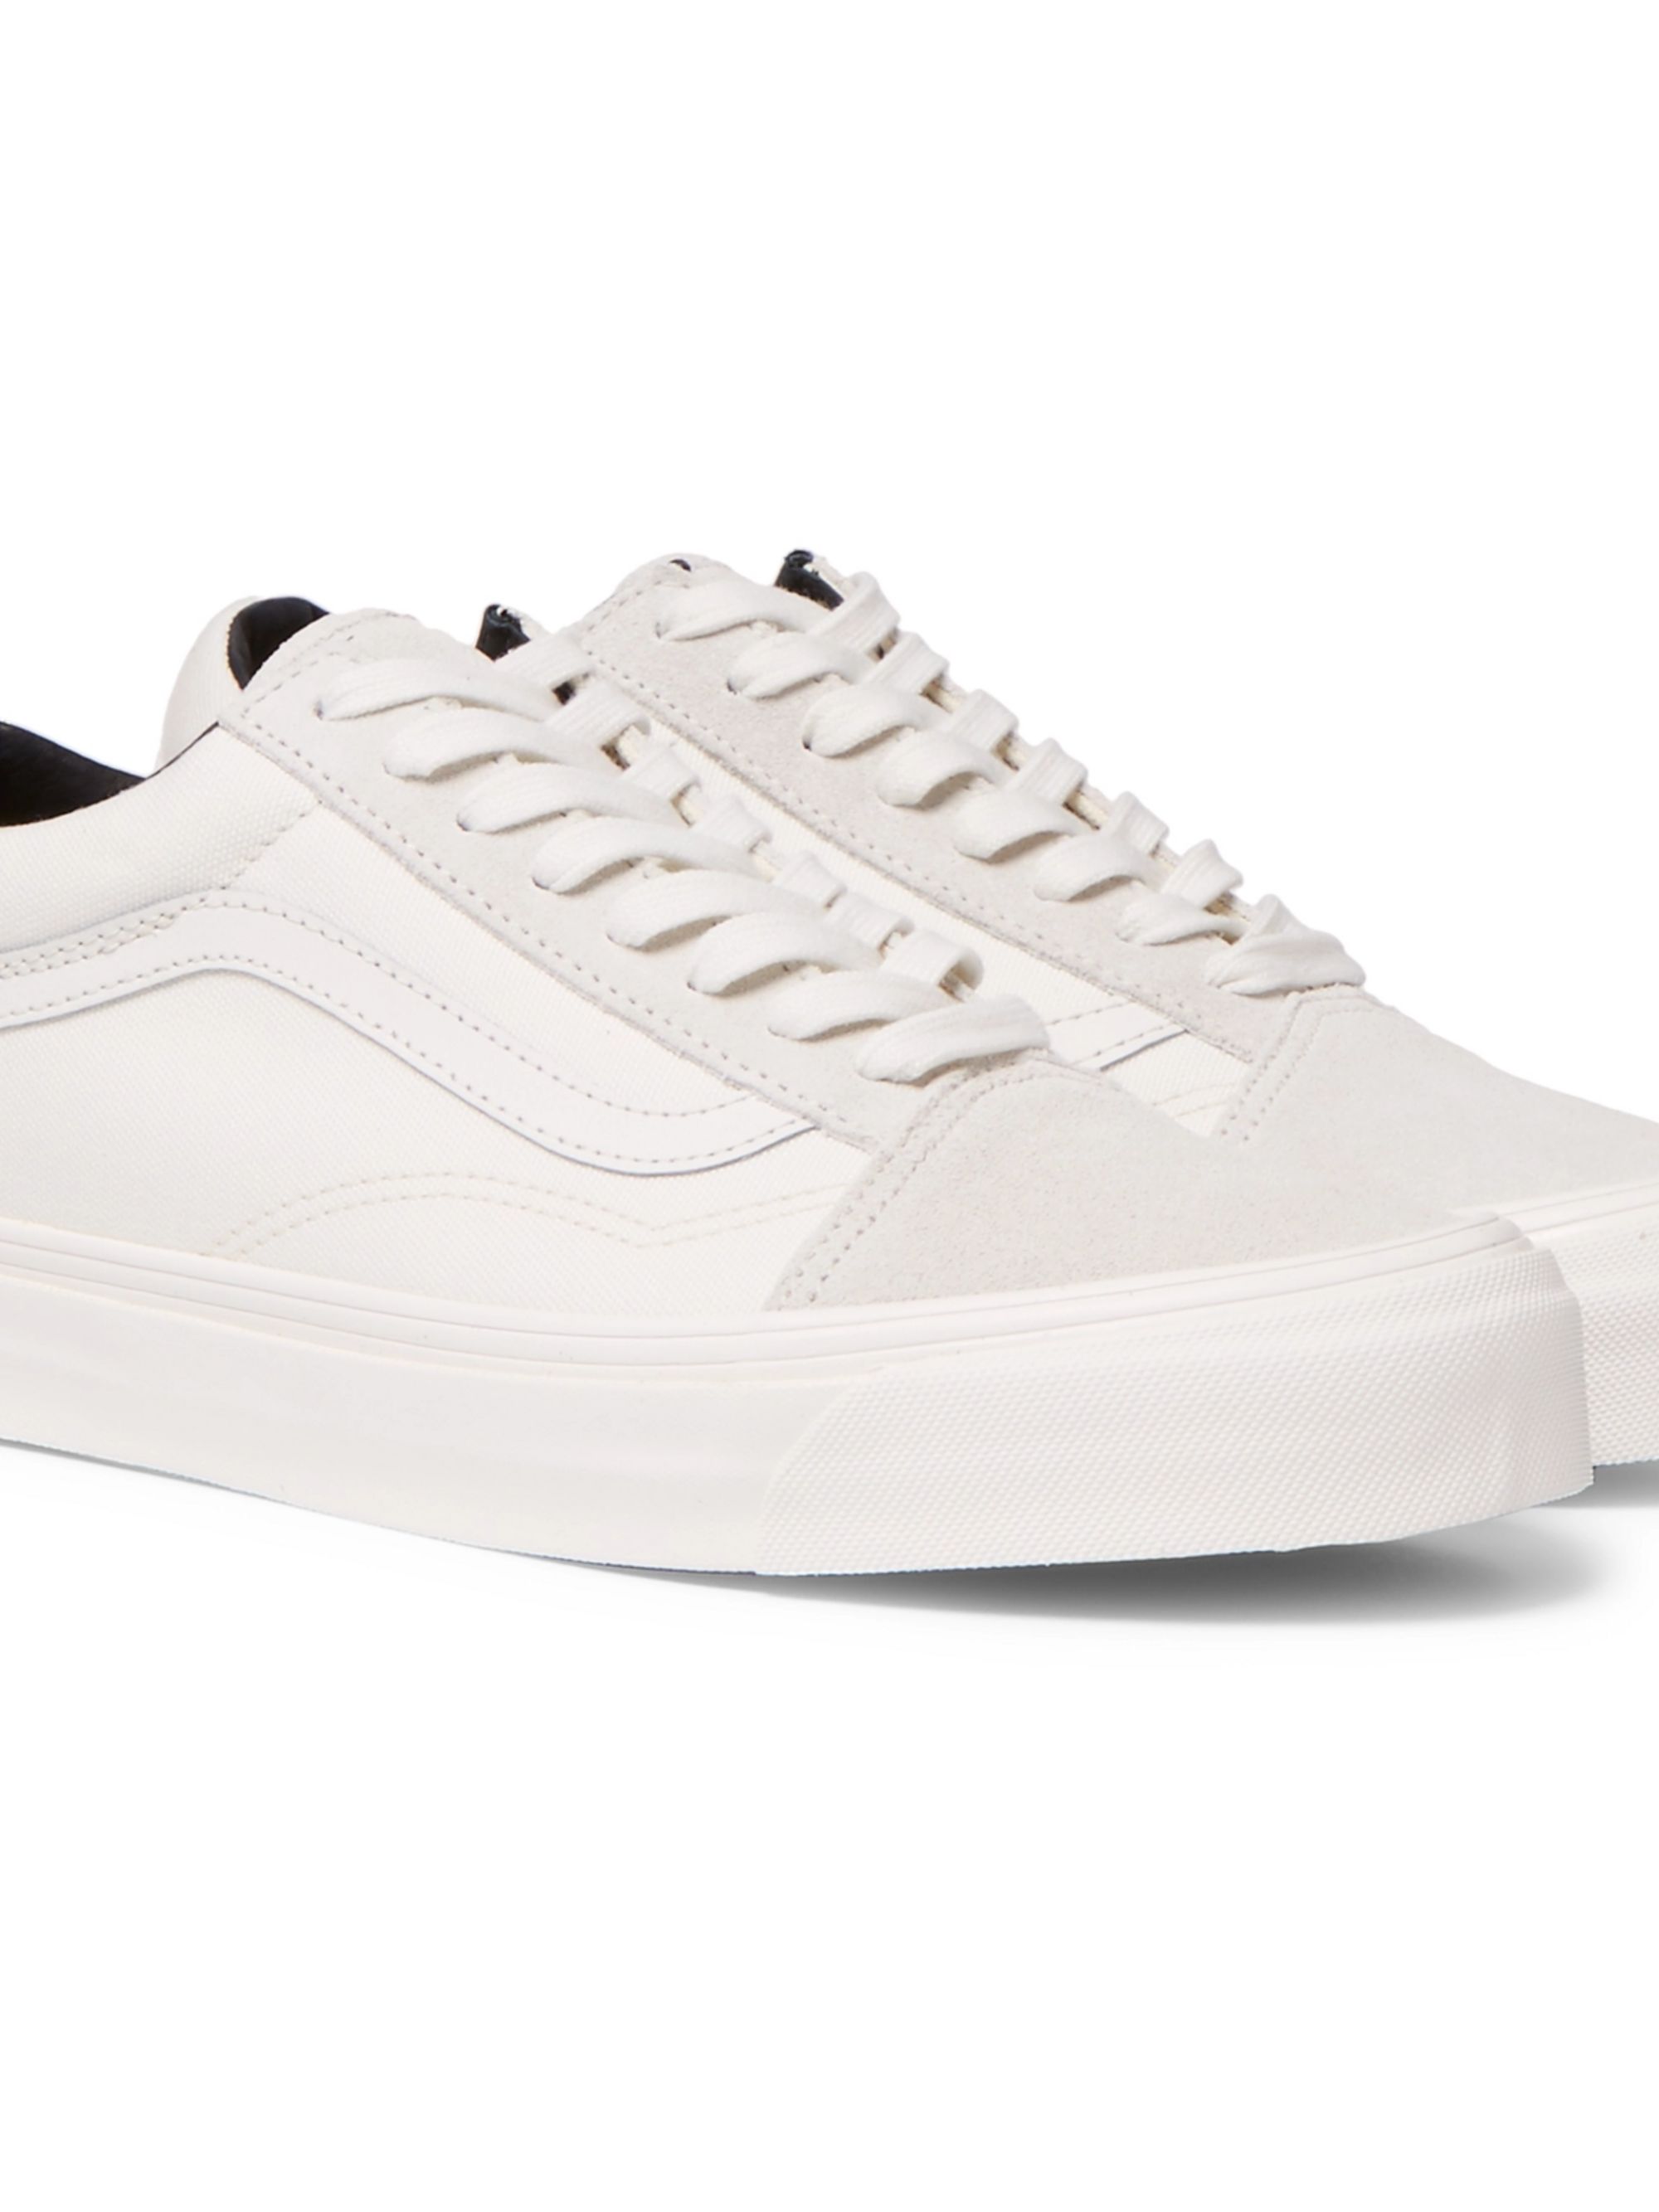 white leather vans with black stripe